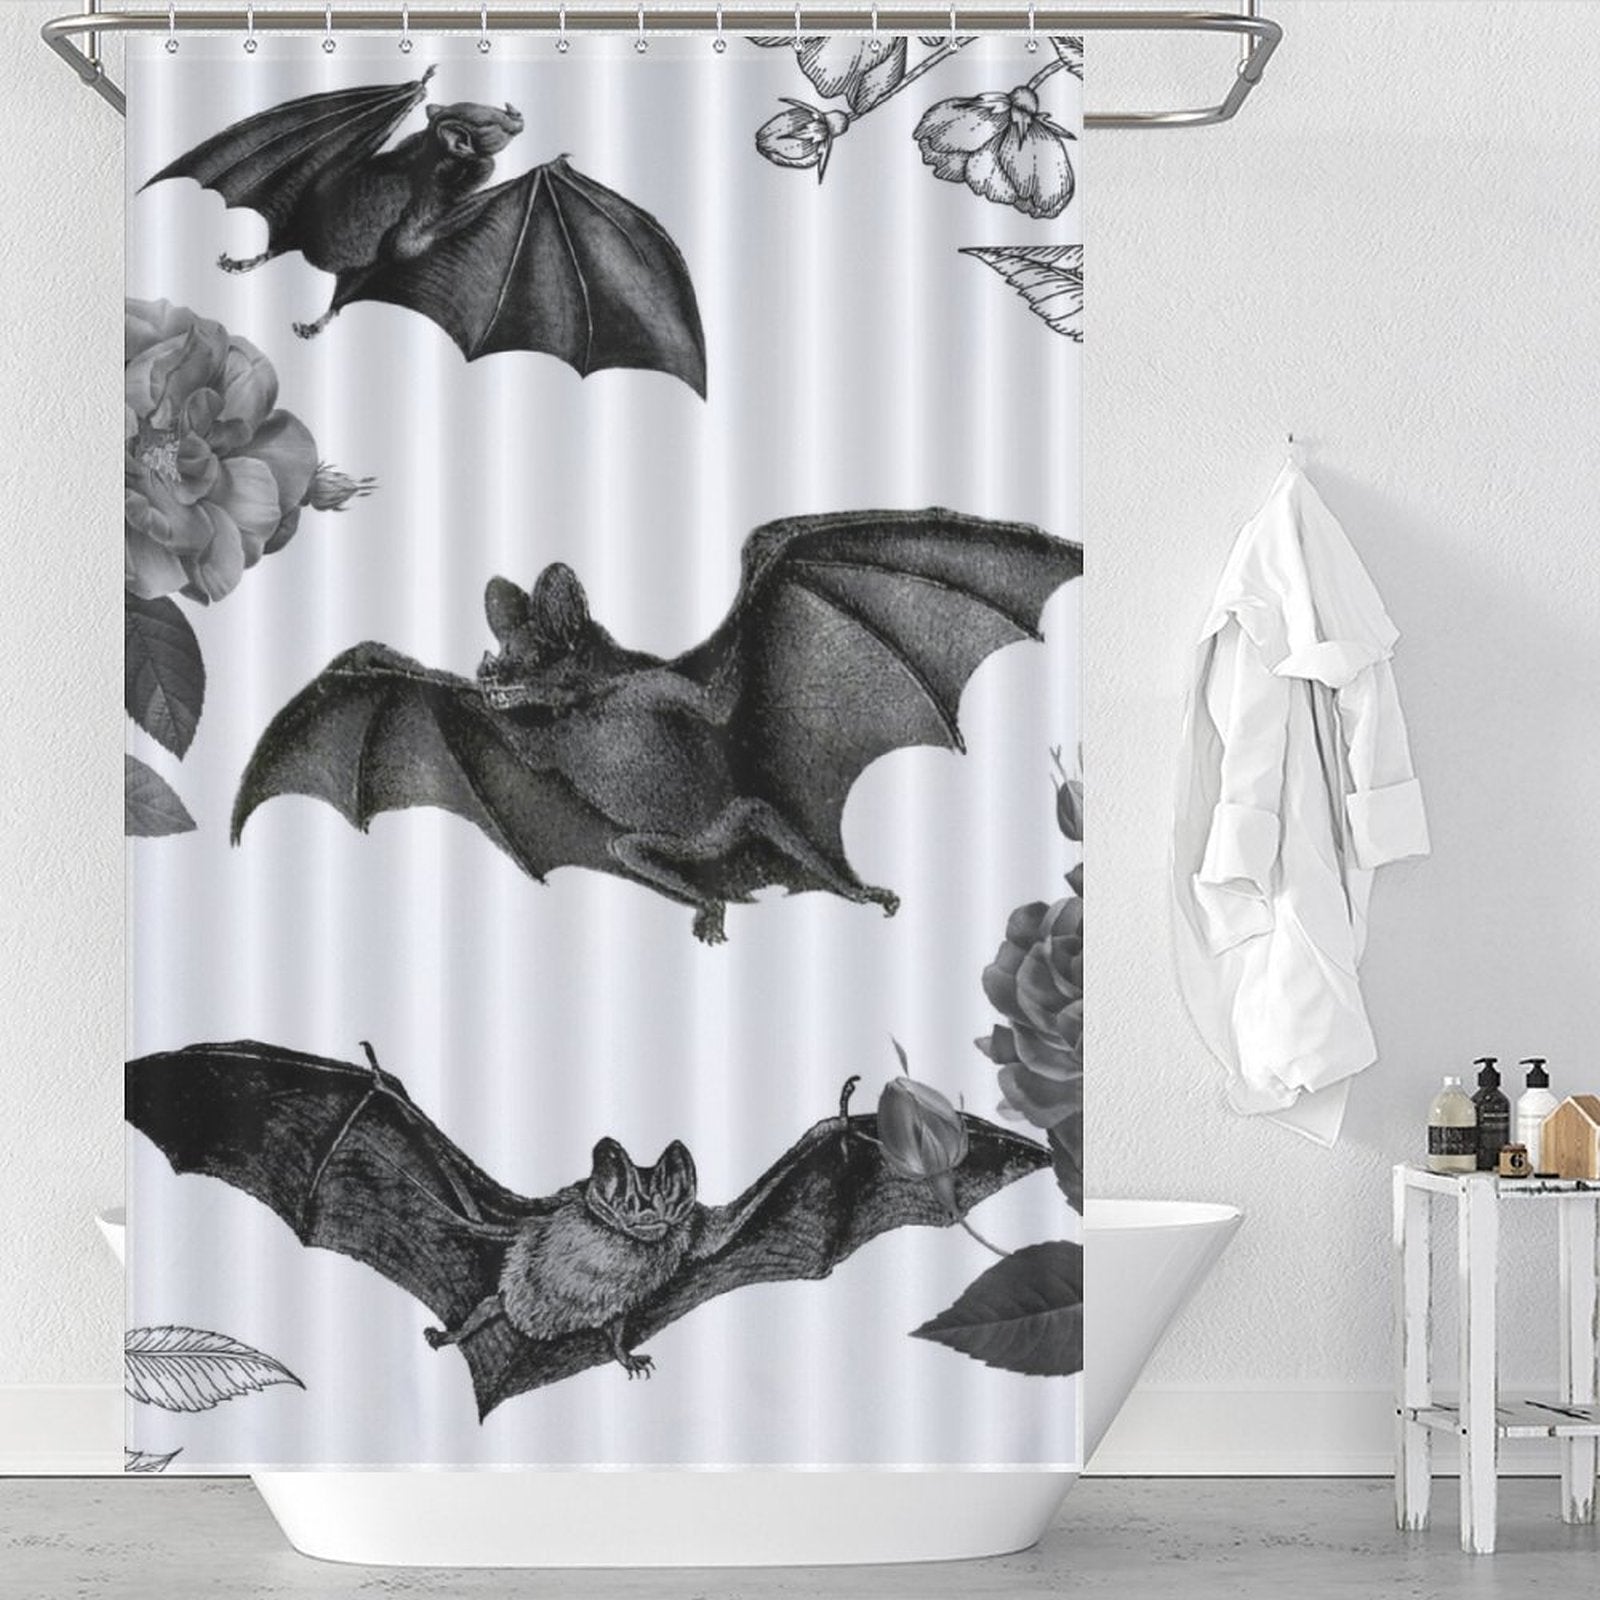 An elegant Gothic Bat shower curtain with bats and flowers, designed for gothic enthusiasts, by Cotton Cat.